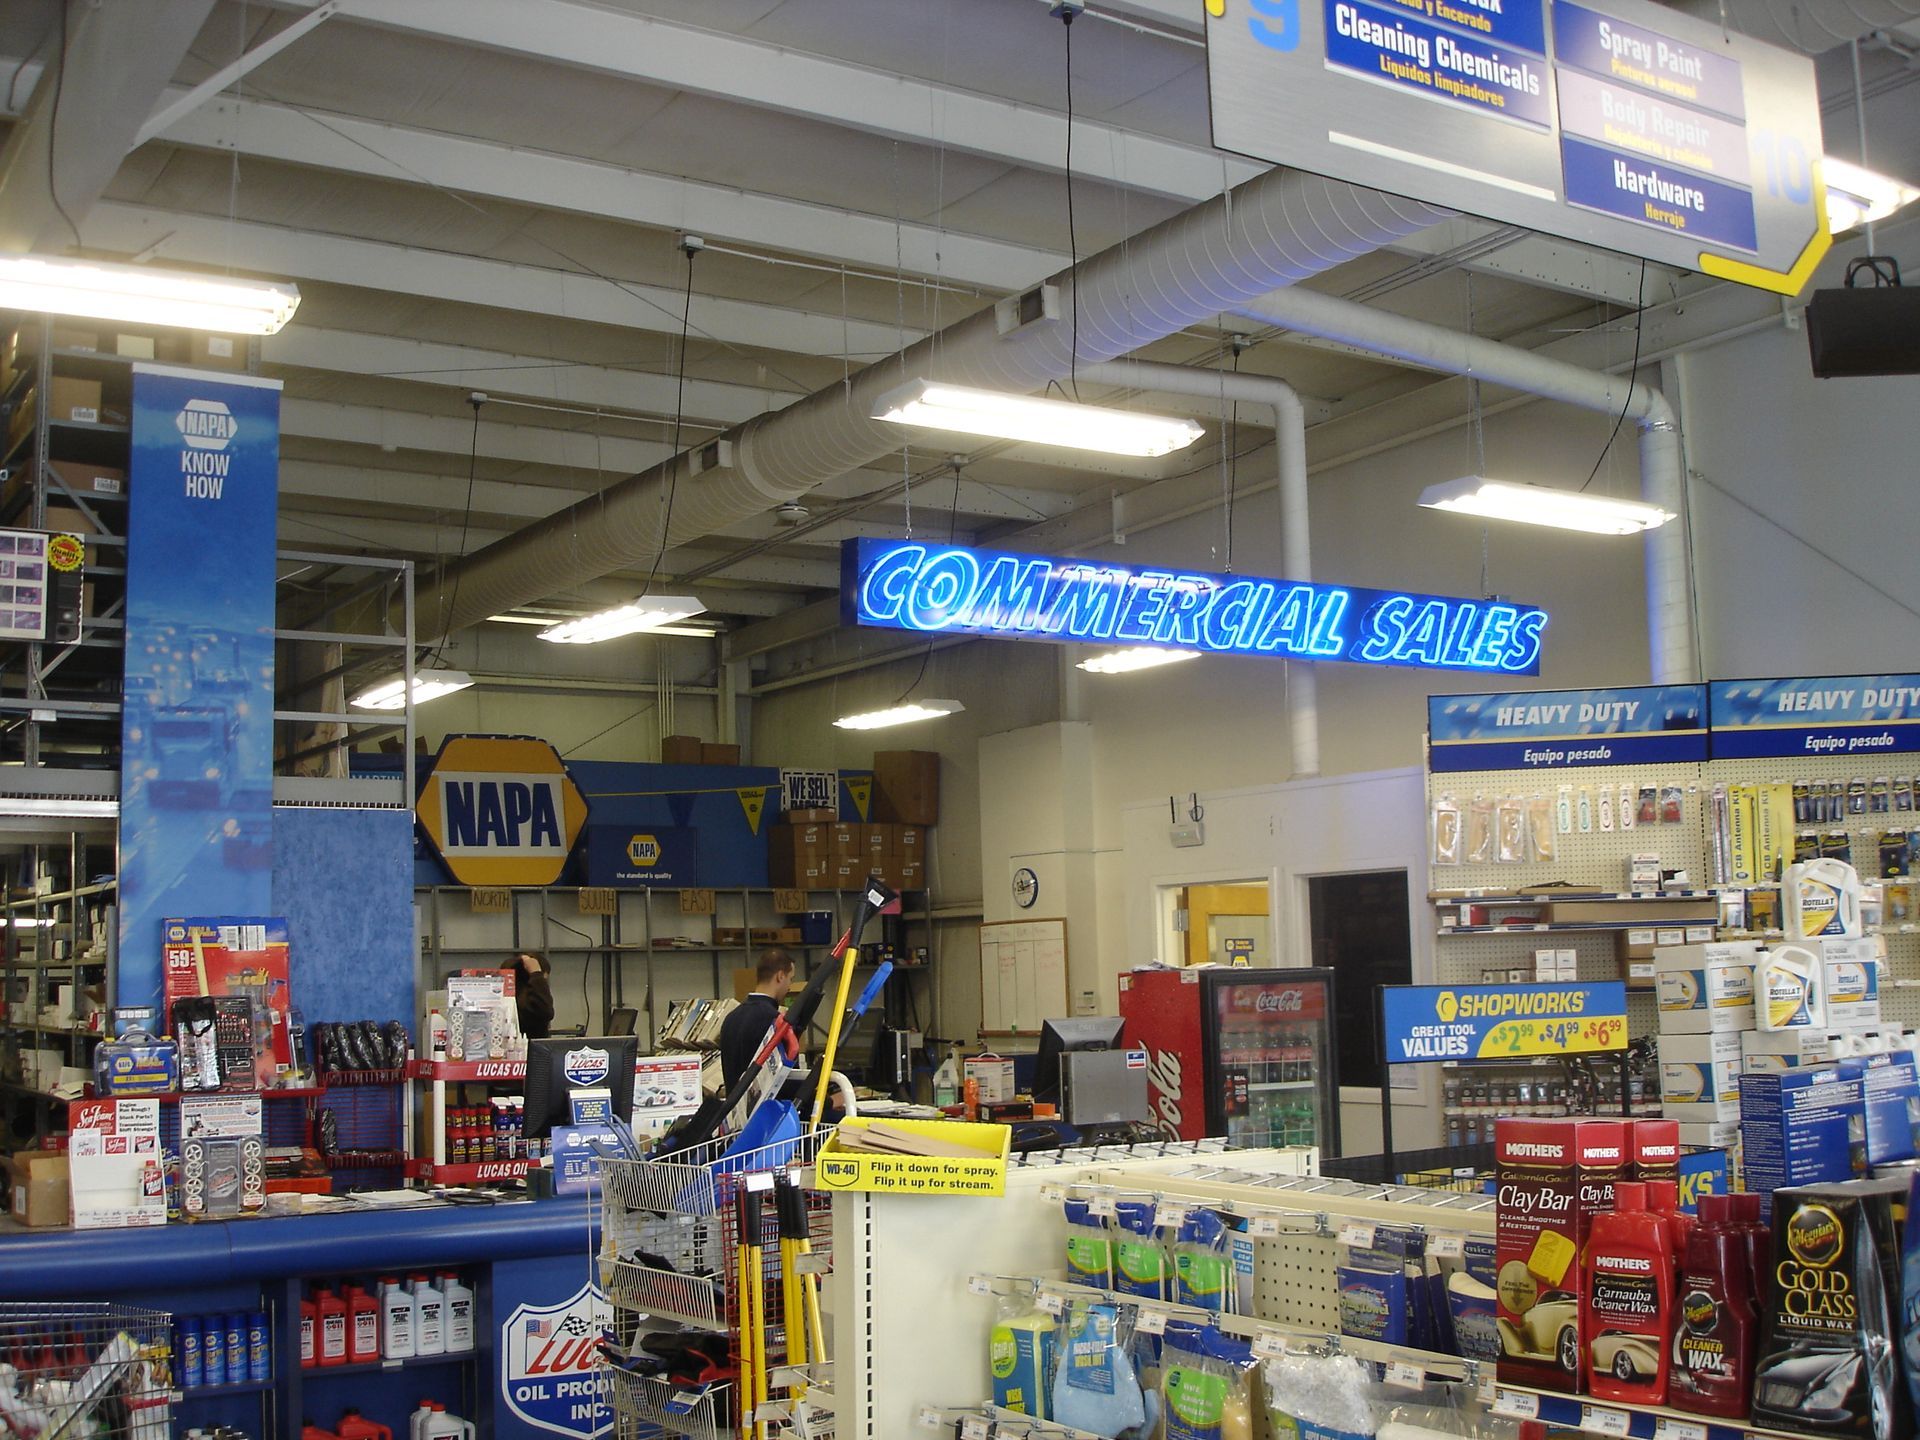 The inside of a napa auto parts store